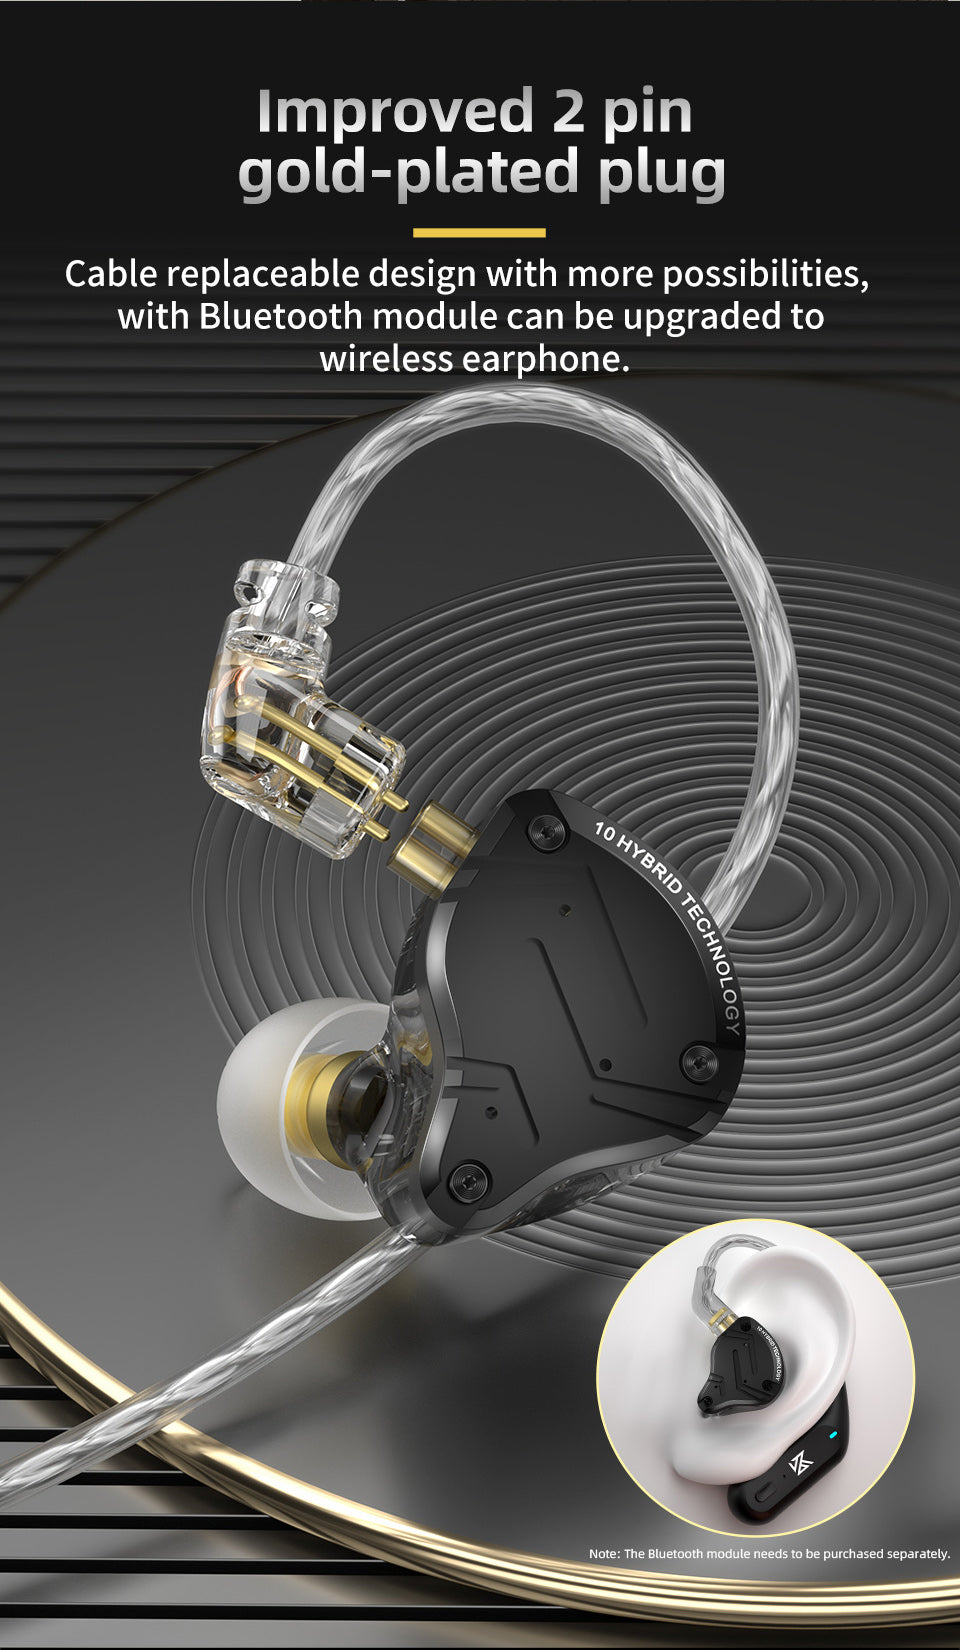 Improved 2 pin gold-plated plug Cable replaceable design with more possibilities, with Bluetooth module can be upgraded to wireless earphone.